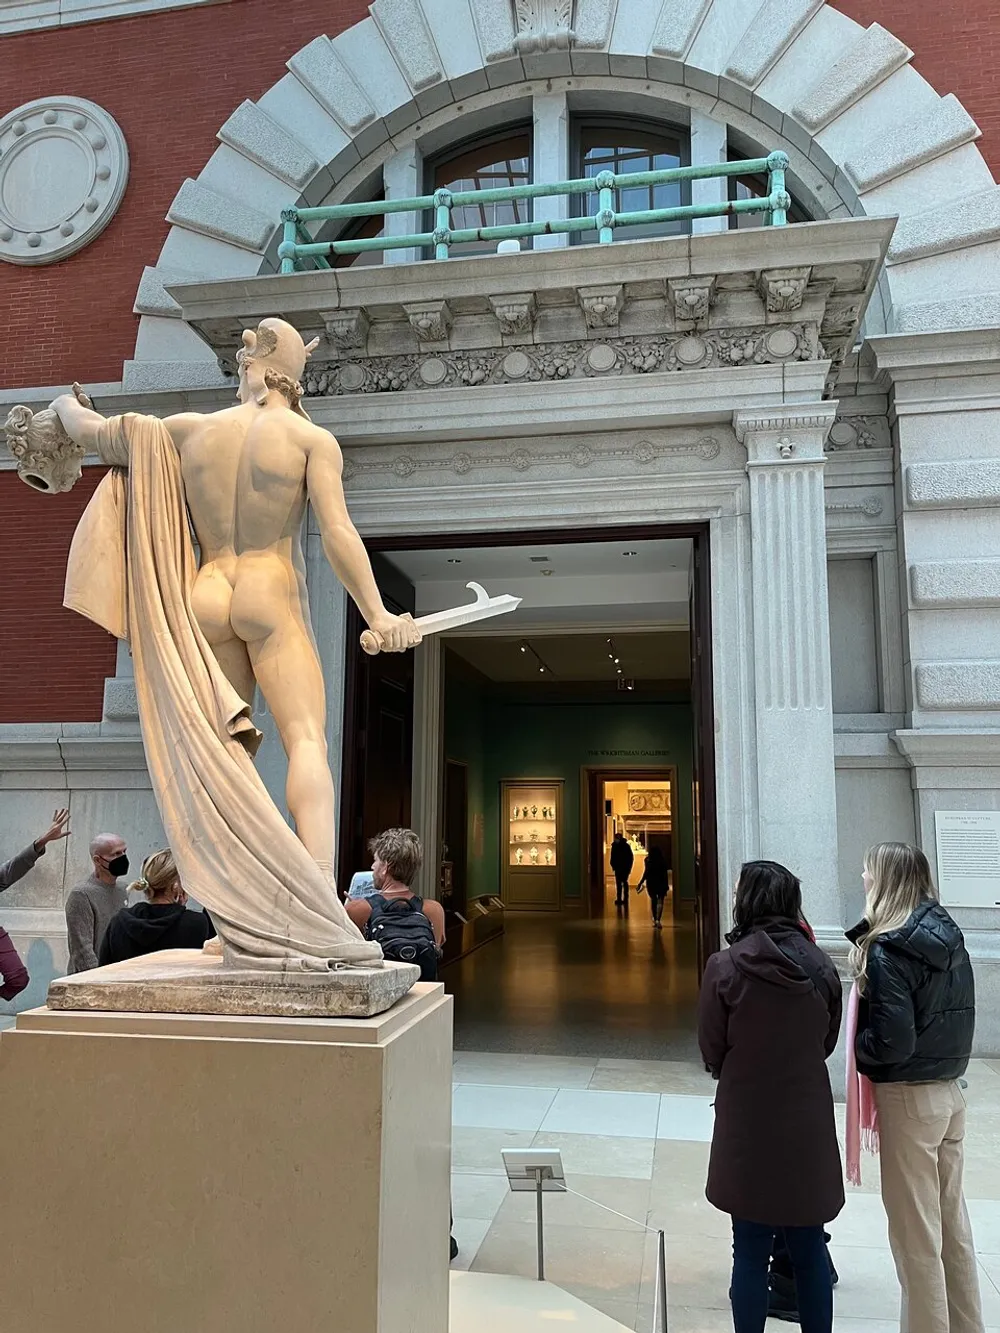 A classical statue of a nude male figure holding a sword stands prominently in a museum gallery where visitors are observing art and interacting with each other